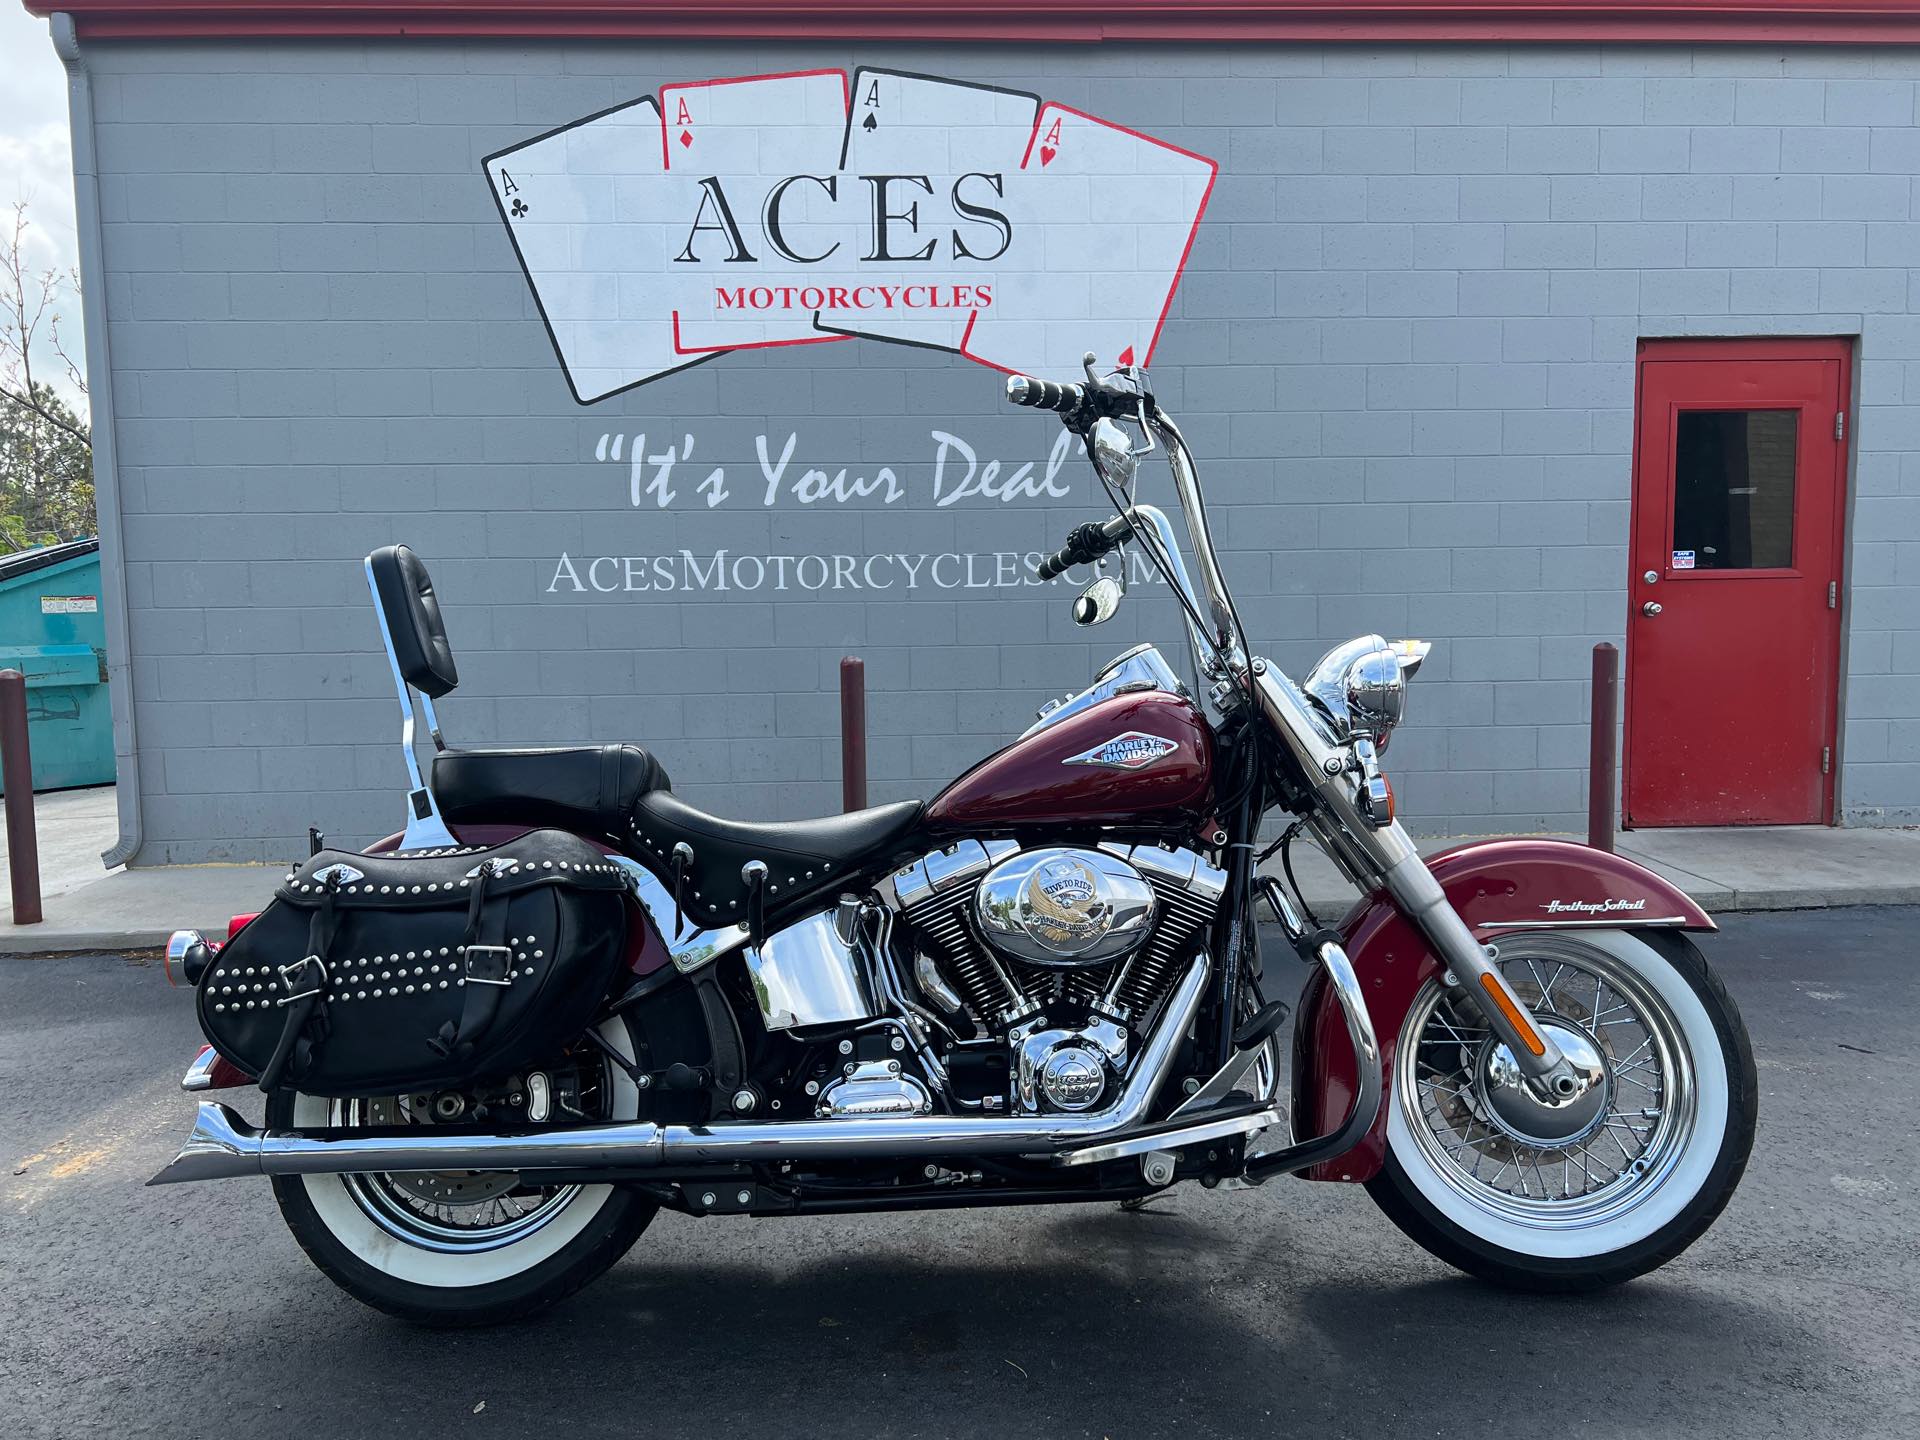 2014 Harley-Davidson Softail Heritage Softail Classic at Aces Motorcycles - Fort Collins